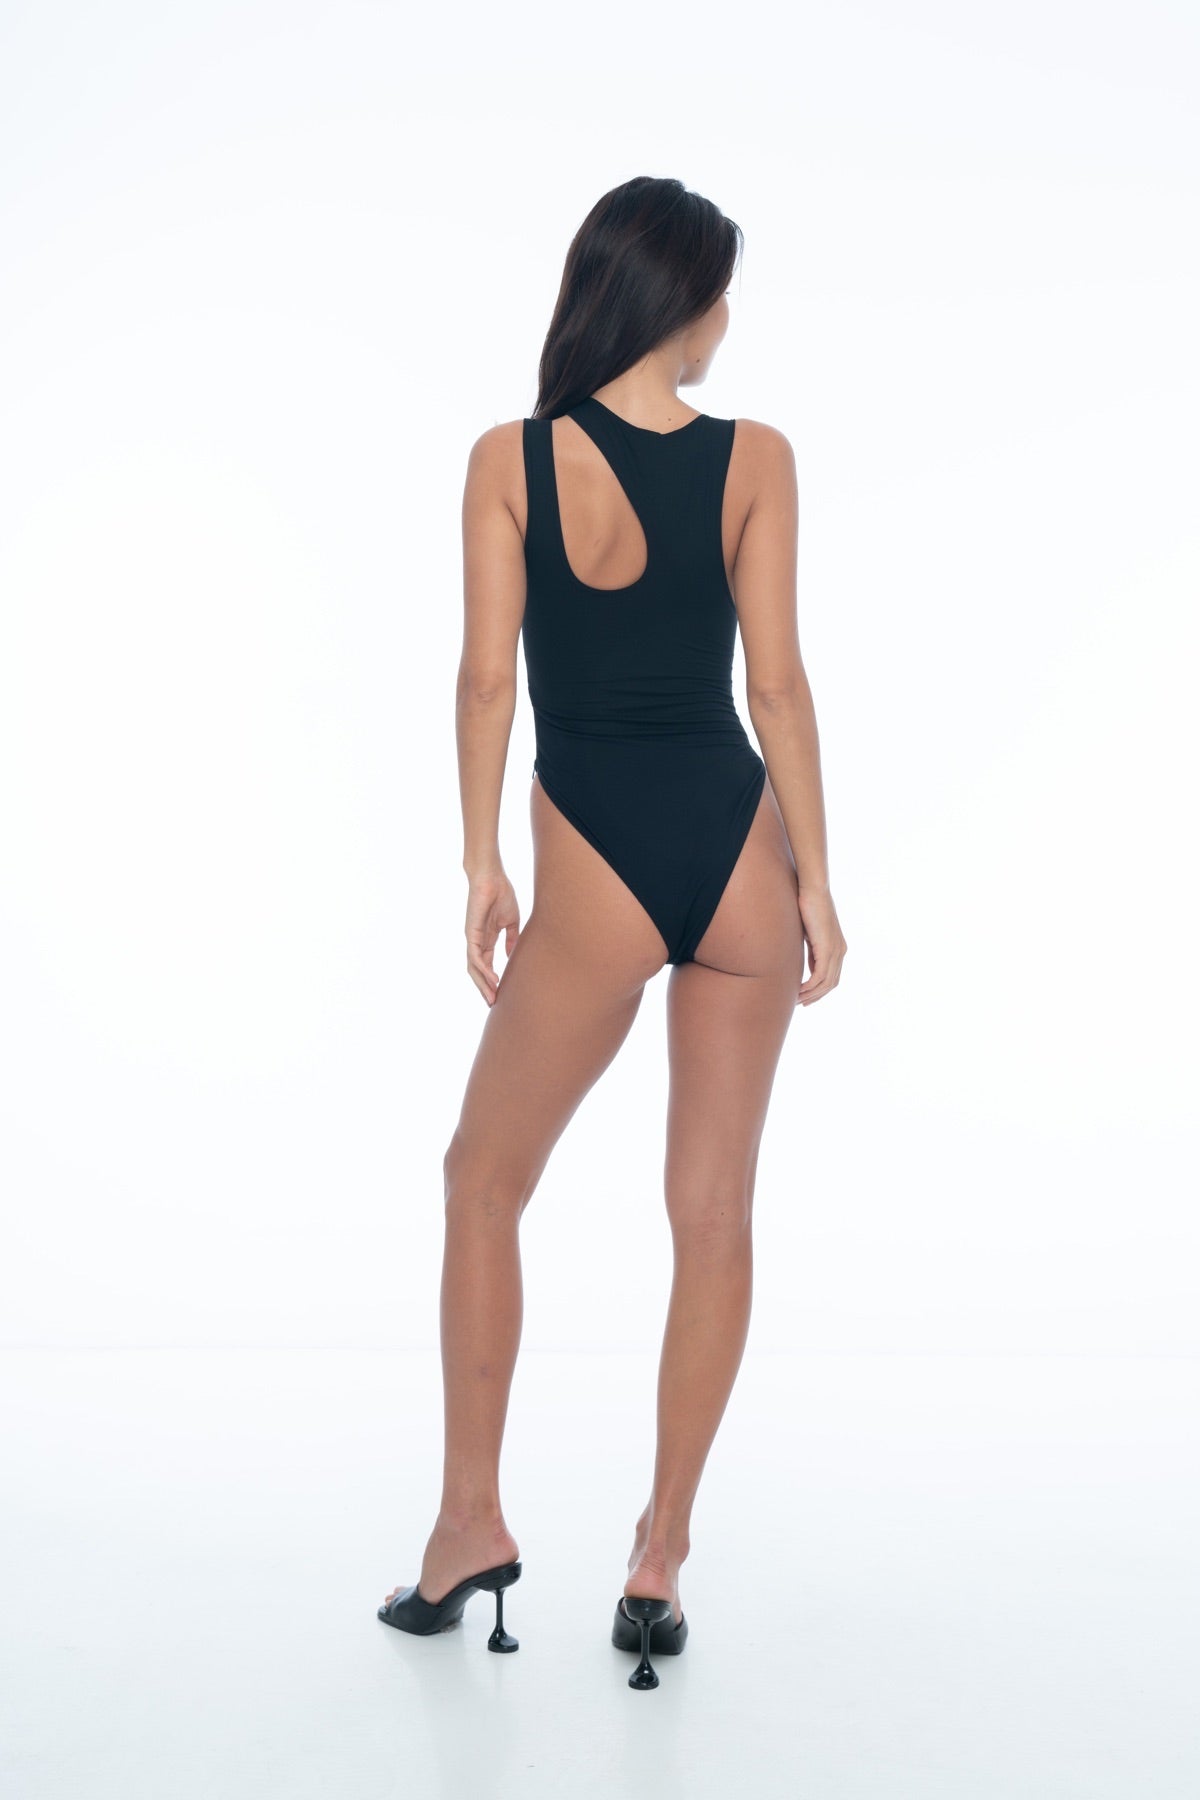 Kylo Bodysuit Black - Bodysuit THIS IS A LOVE SONG